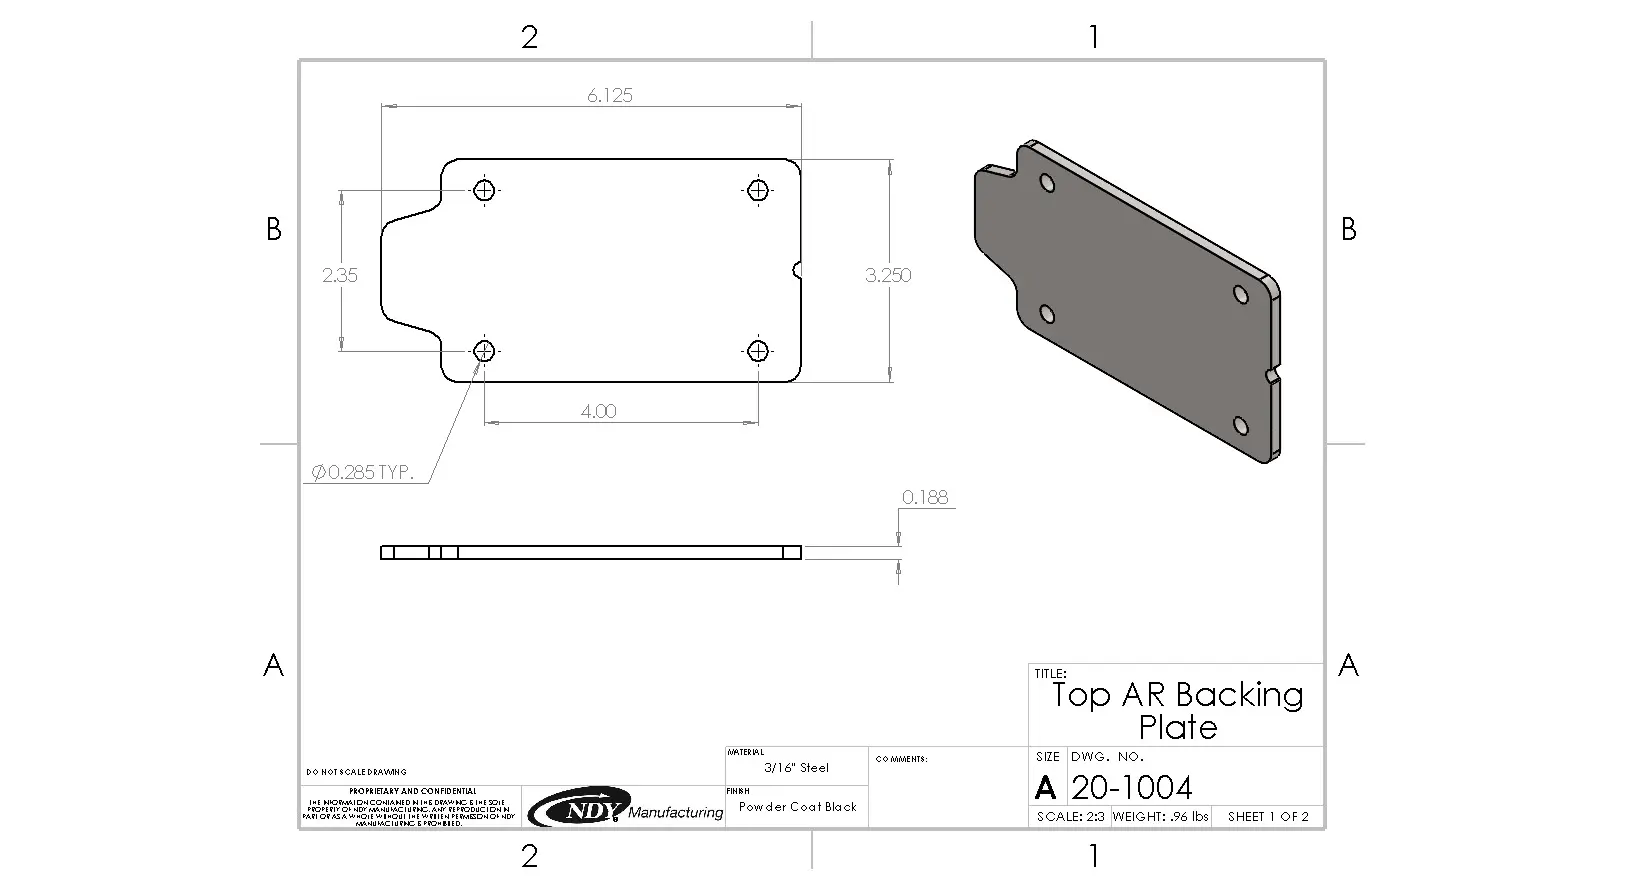 A drawing of a Stalk Stomper Top AR Backing Plate - mounting plate.